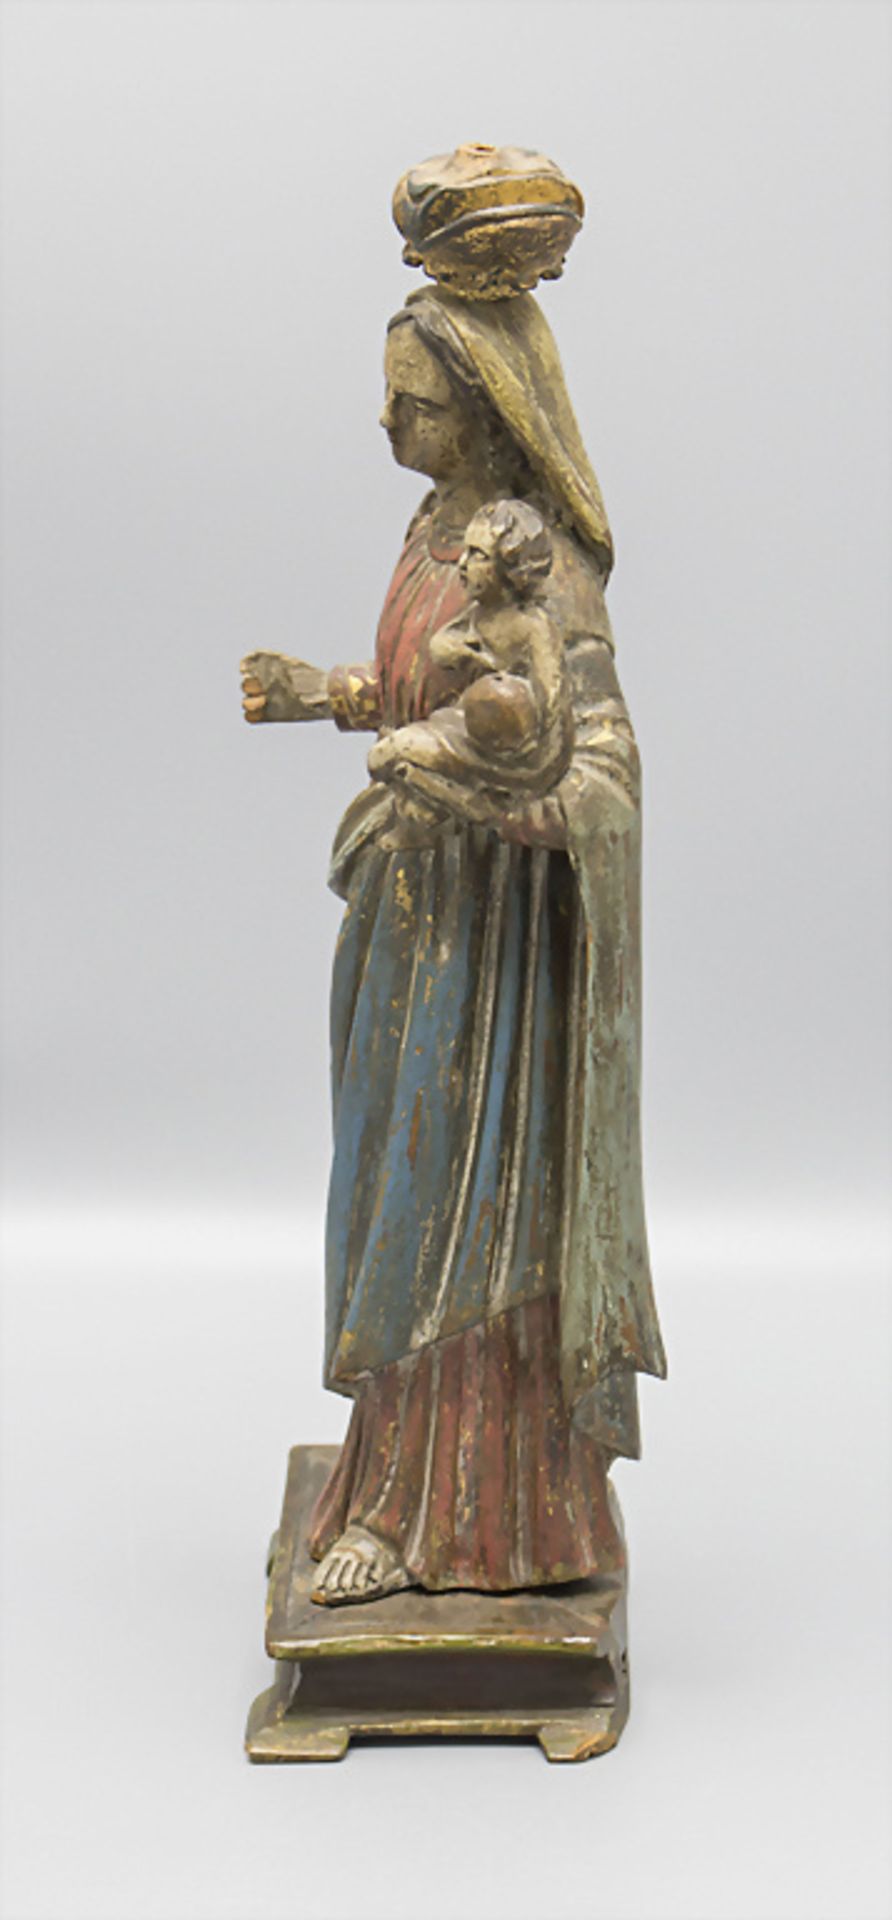 Holzskulptur einer Madonna mit Kind / A wooden sculpture of mother Mary with child, 18. Jh. - Image 5 of 6